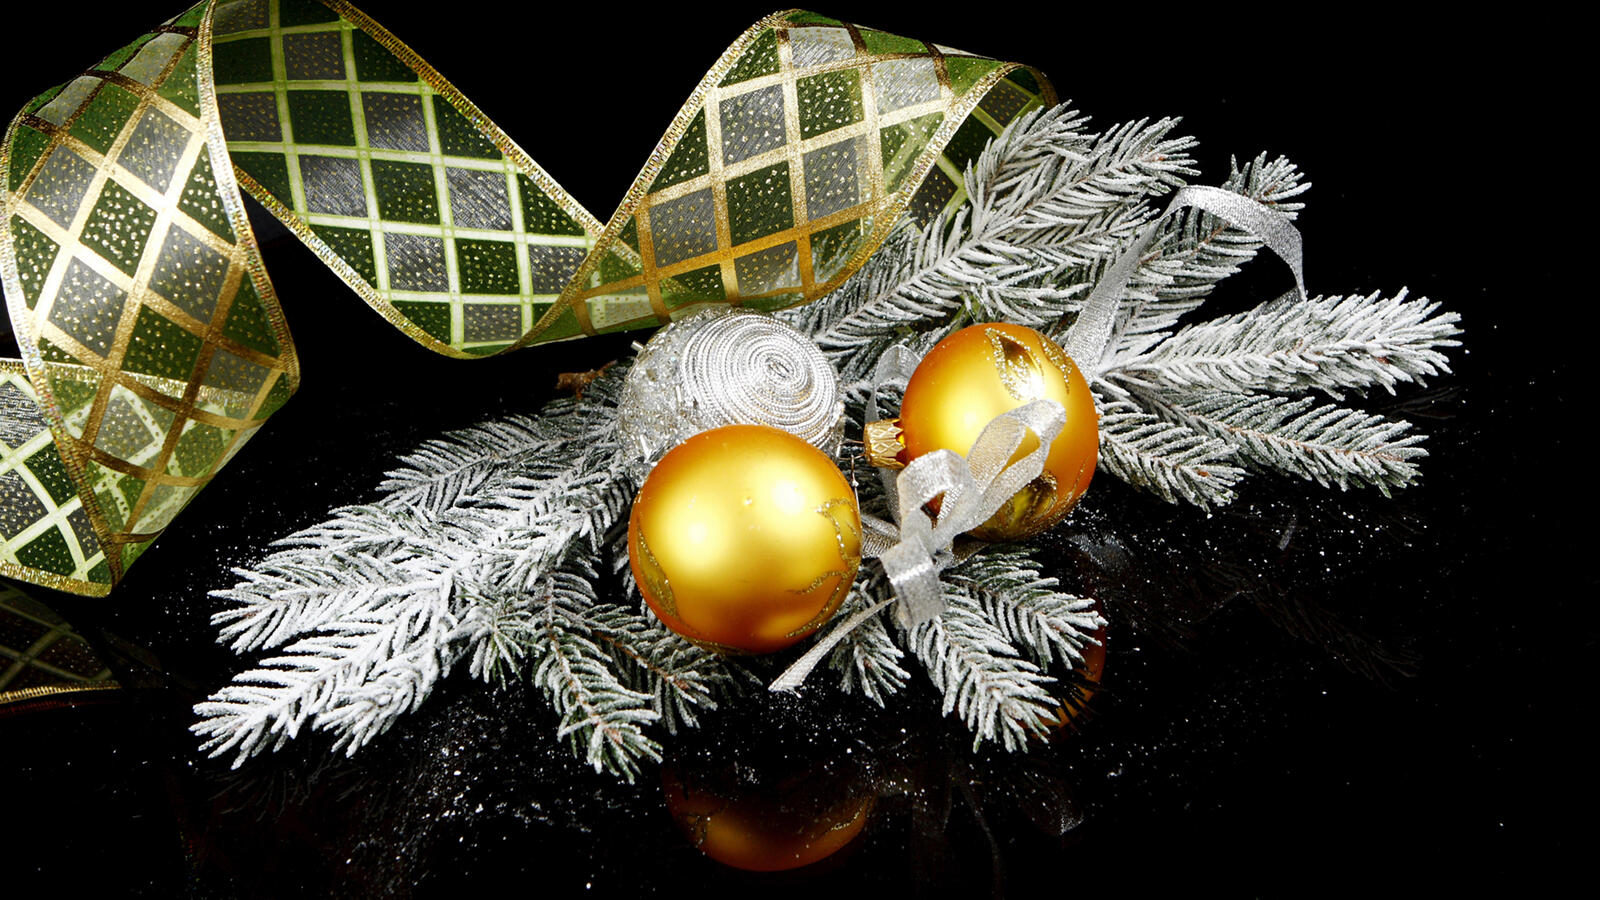 Wallpapers background balls christmas tree on the desktop